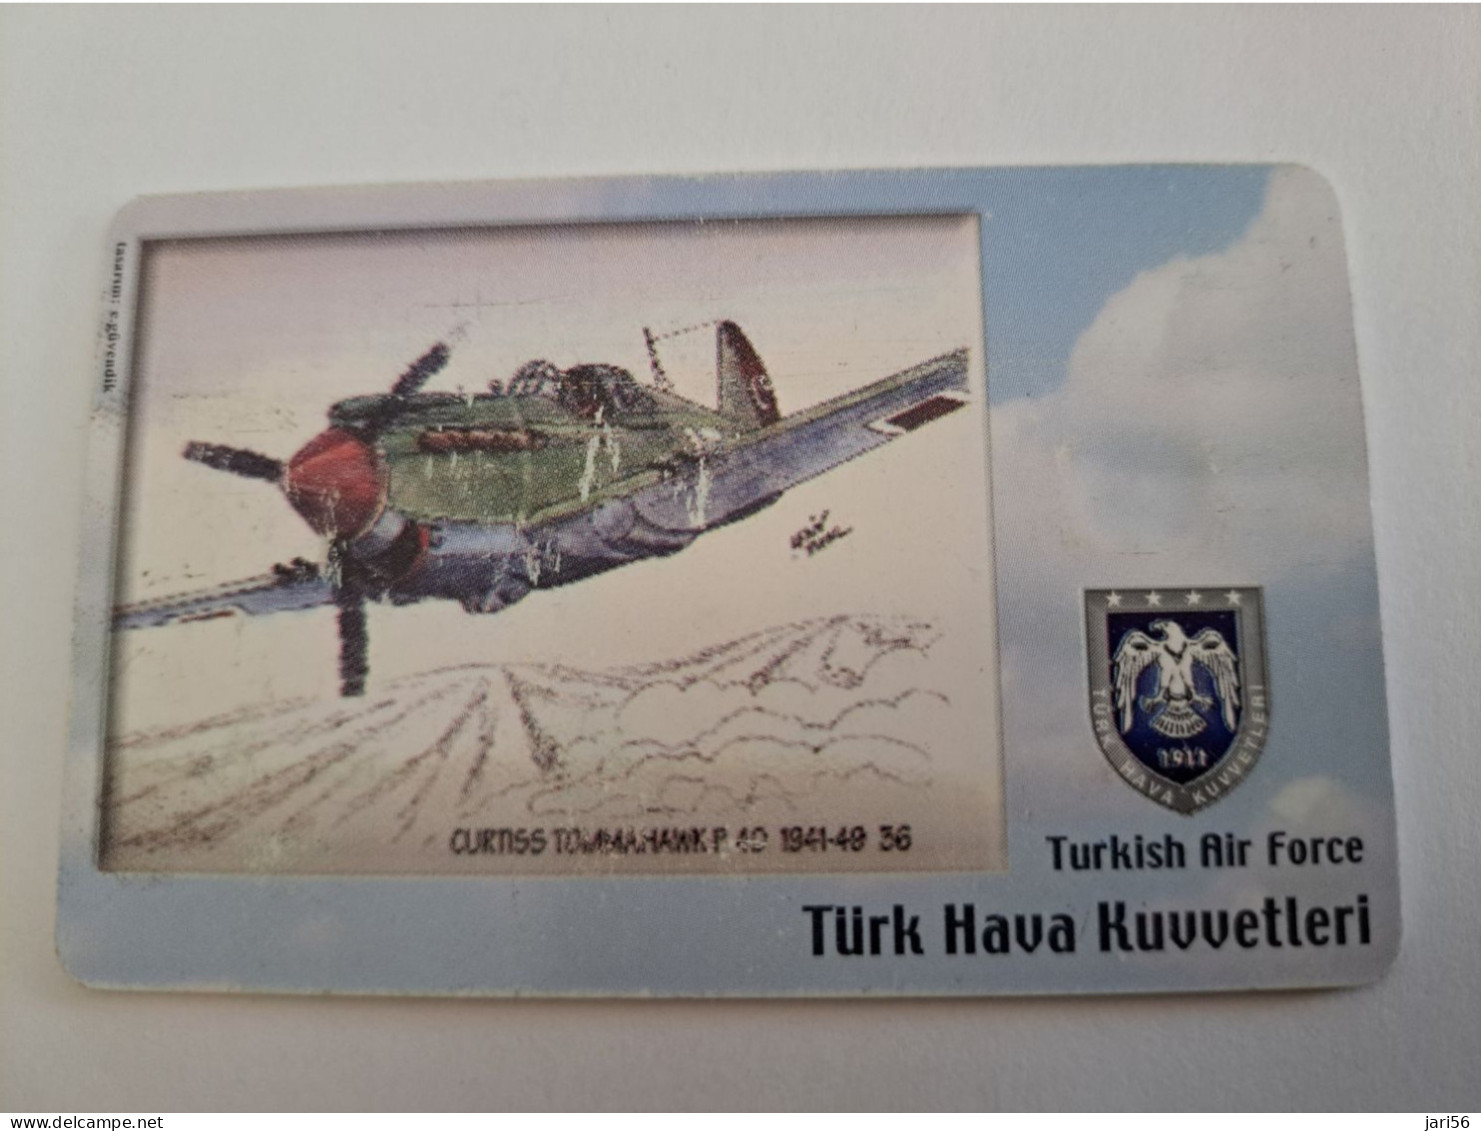 TURKIJE / 50 UNITS/ CHIPCARD/ TURKISH AIR FORCE  / DIFFERENT PLANES /        Fine Used Card  **15422** - Turquie